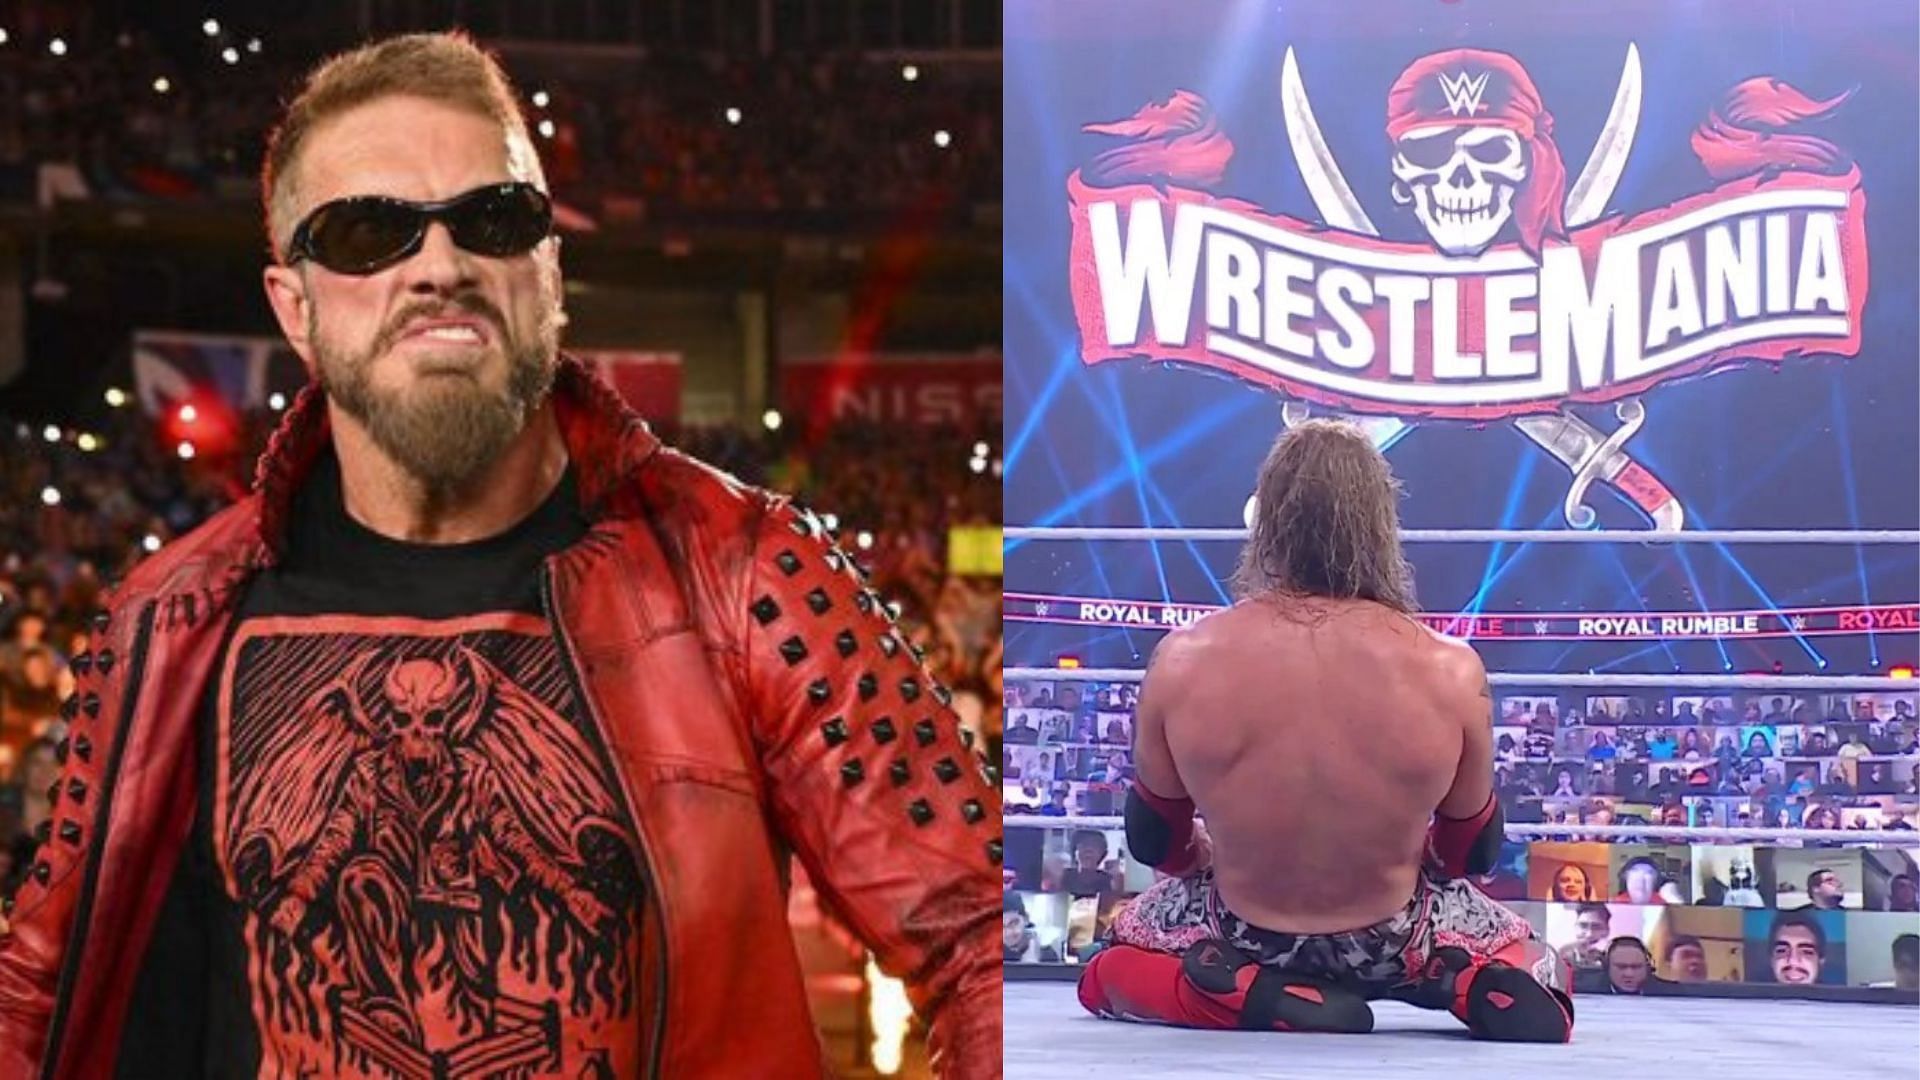 Edge has featured in the Royal Rumble event for past three years